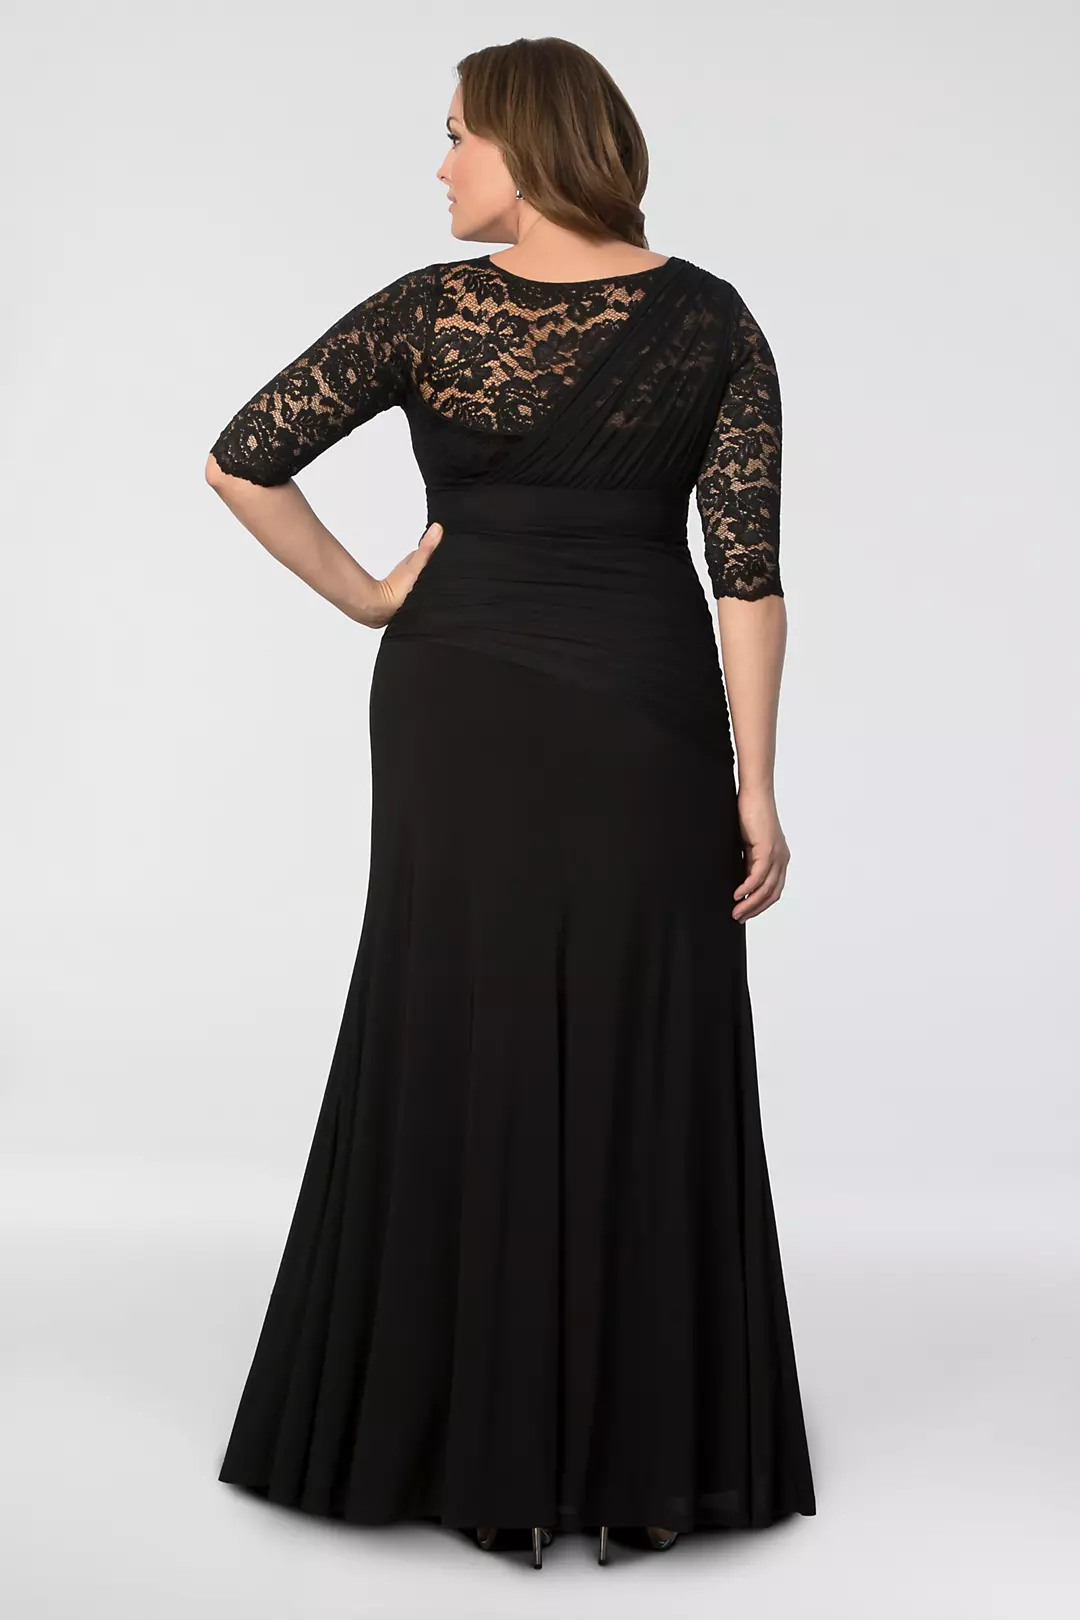 Soiree Plus Size Evening Gown Image 2